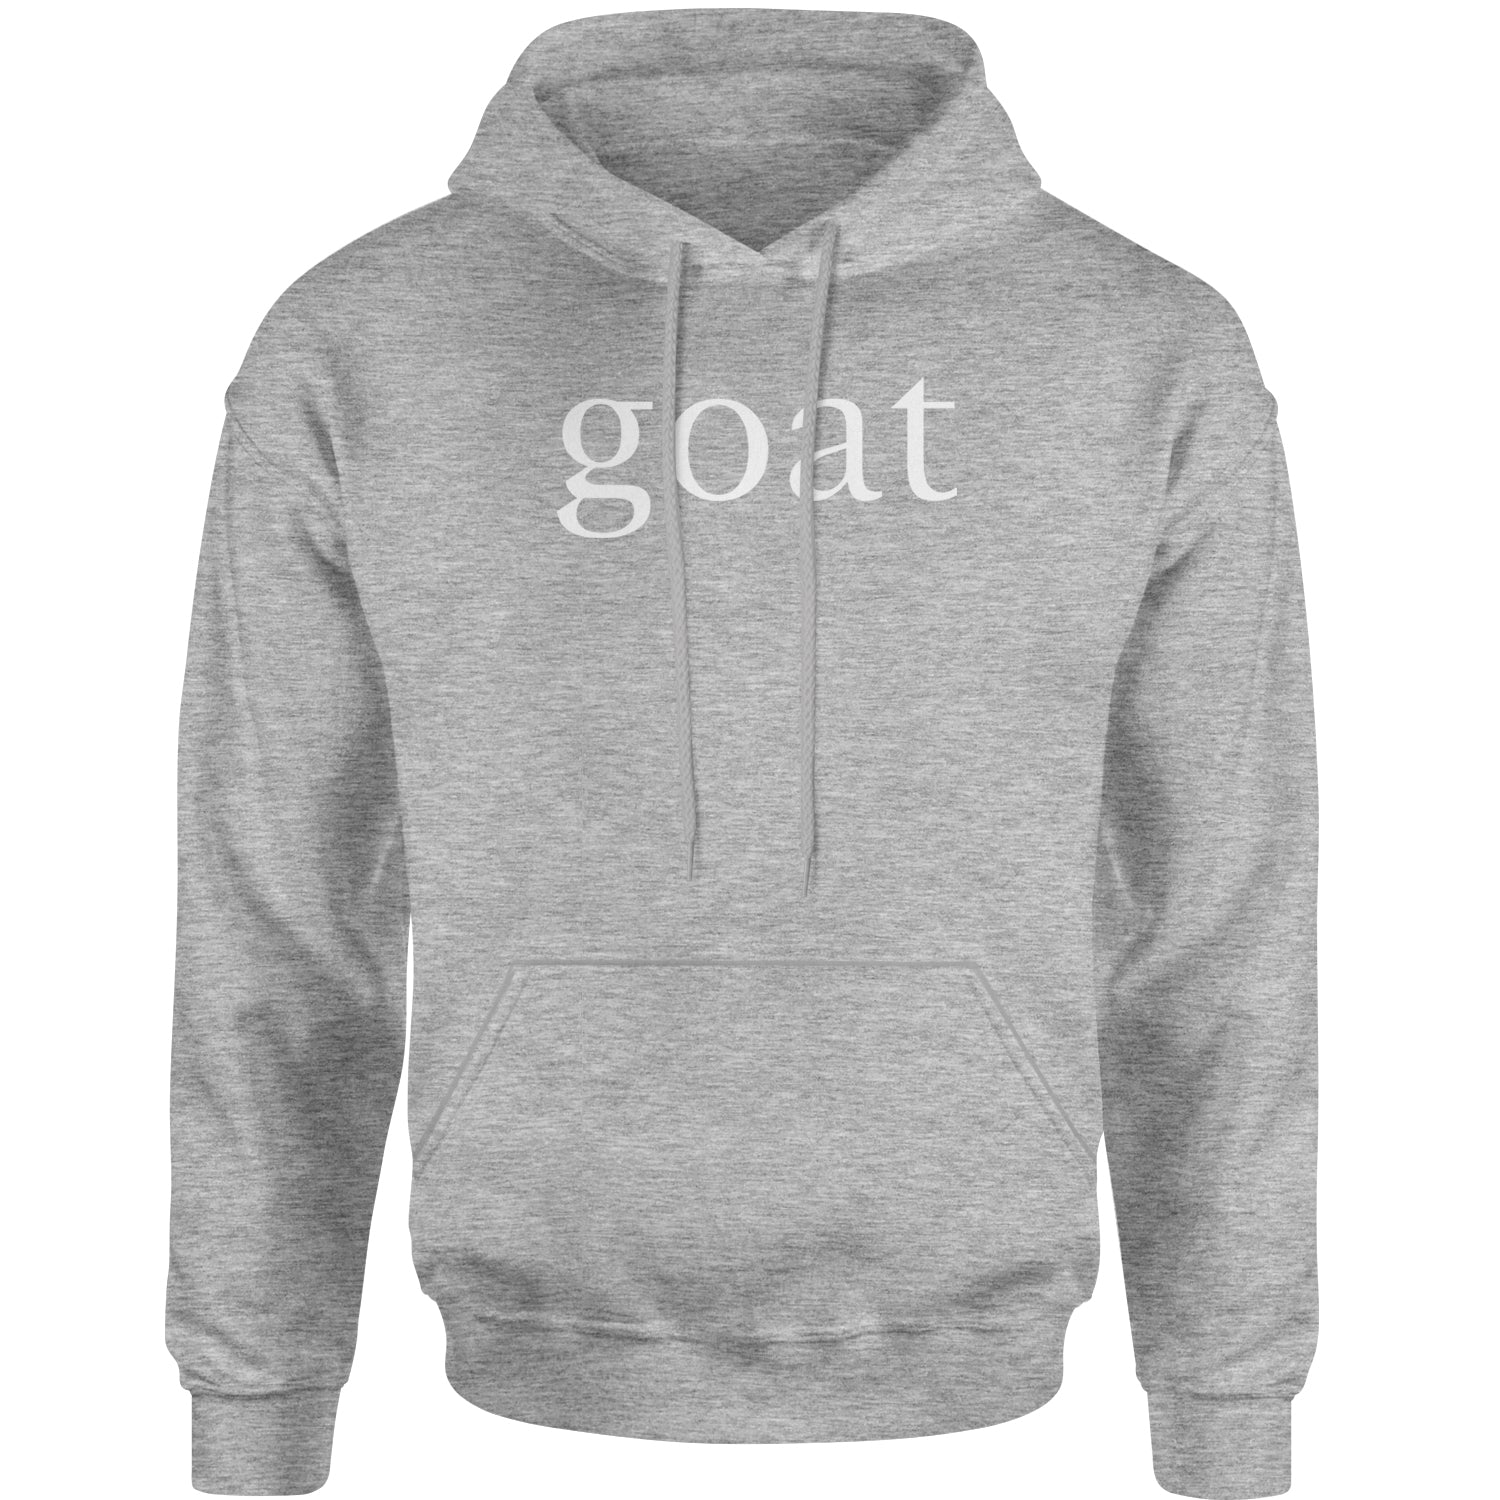 GOAT - Greatest Of All Time Adult Hoodie Sweatshirt all, goat, greatest, hip, hiphop, hop, in, new, of, rap, time, york by Expression Tees